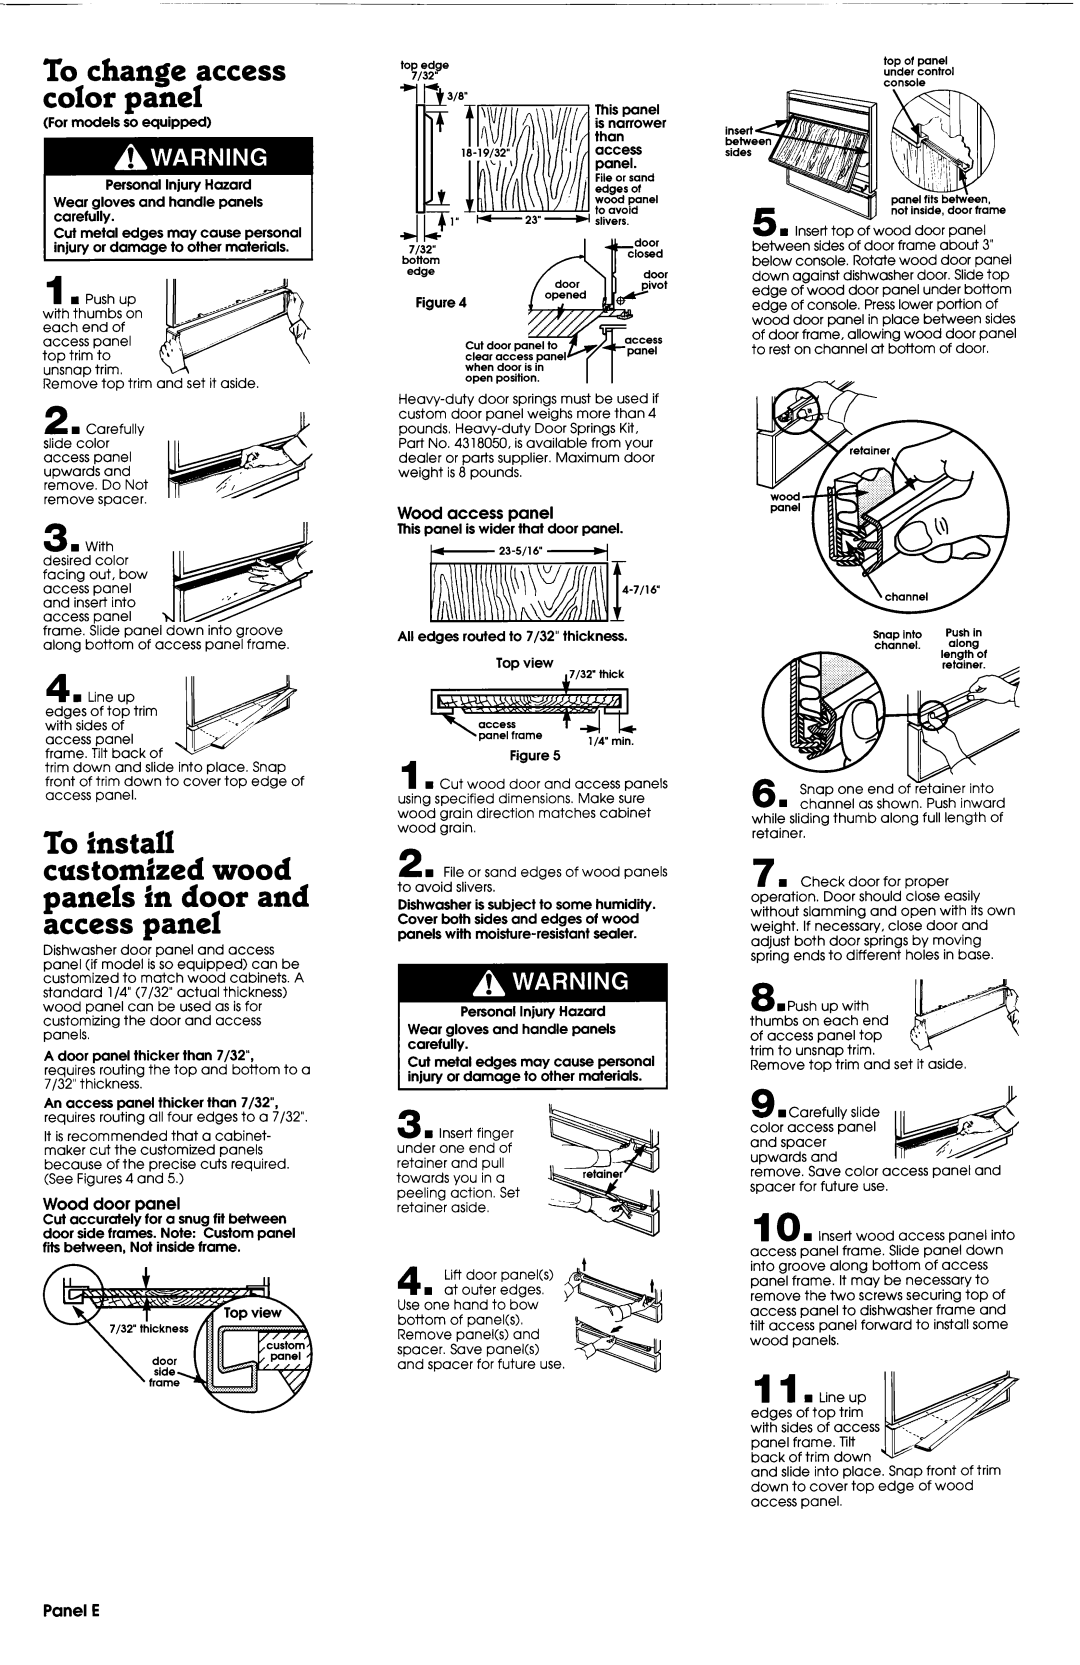 Whirlpool 3374369 installation instructions To change access color panel, Wood door panel, Wood access panel, Panel E 